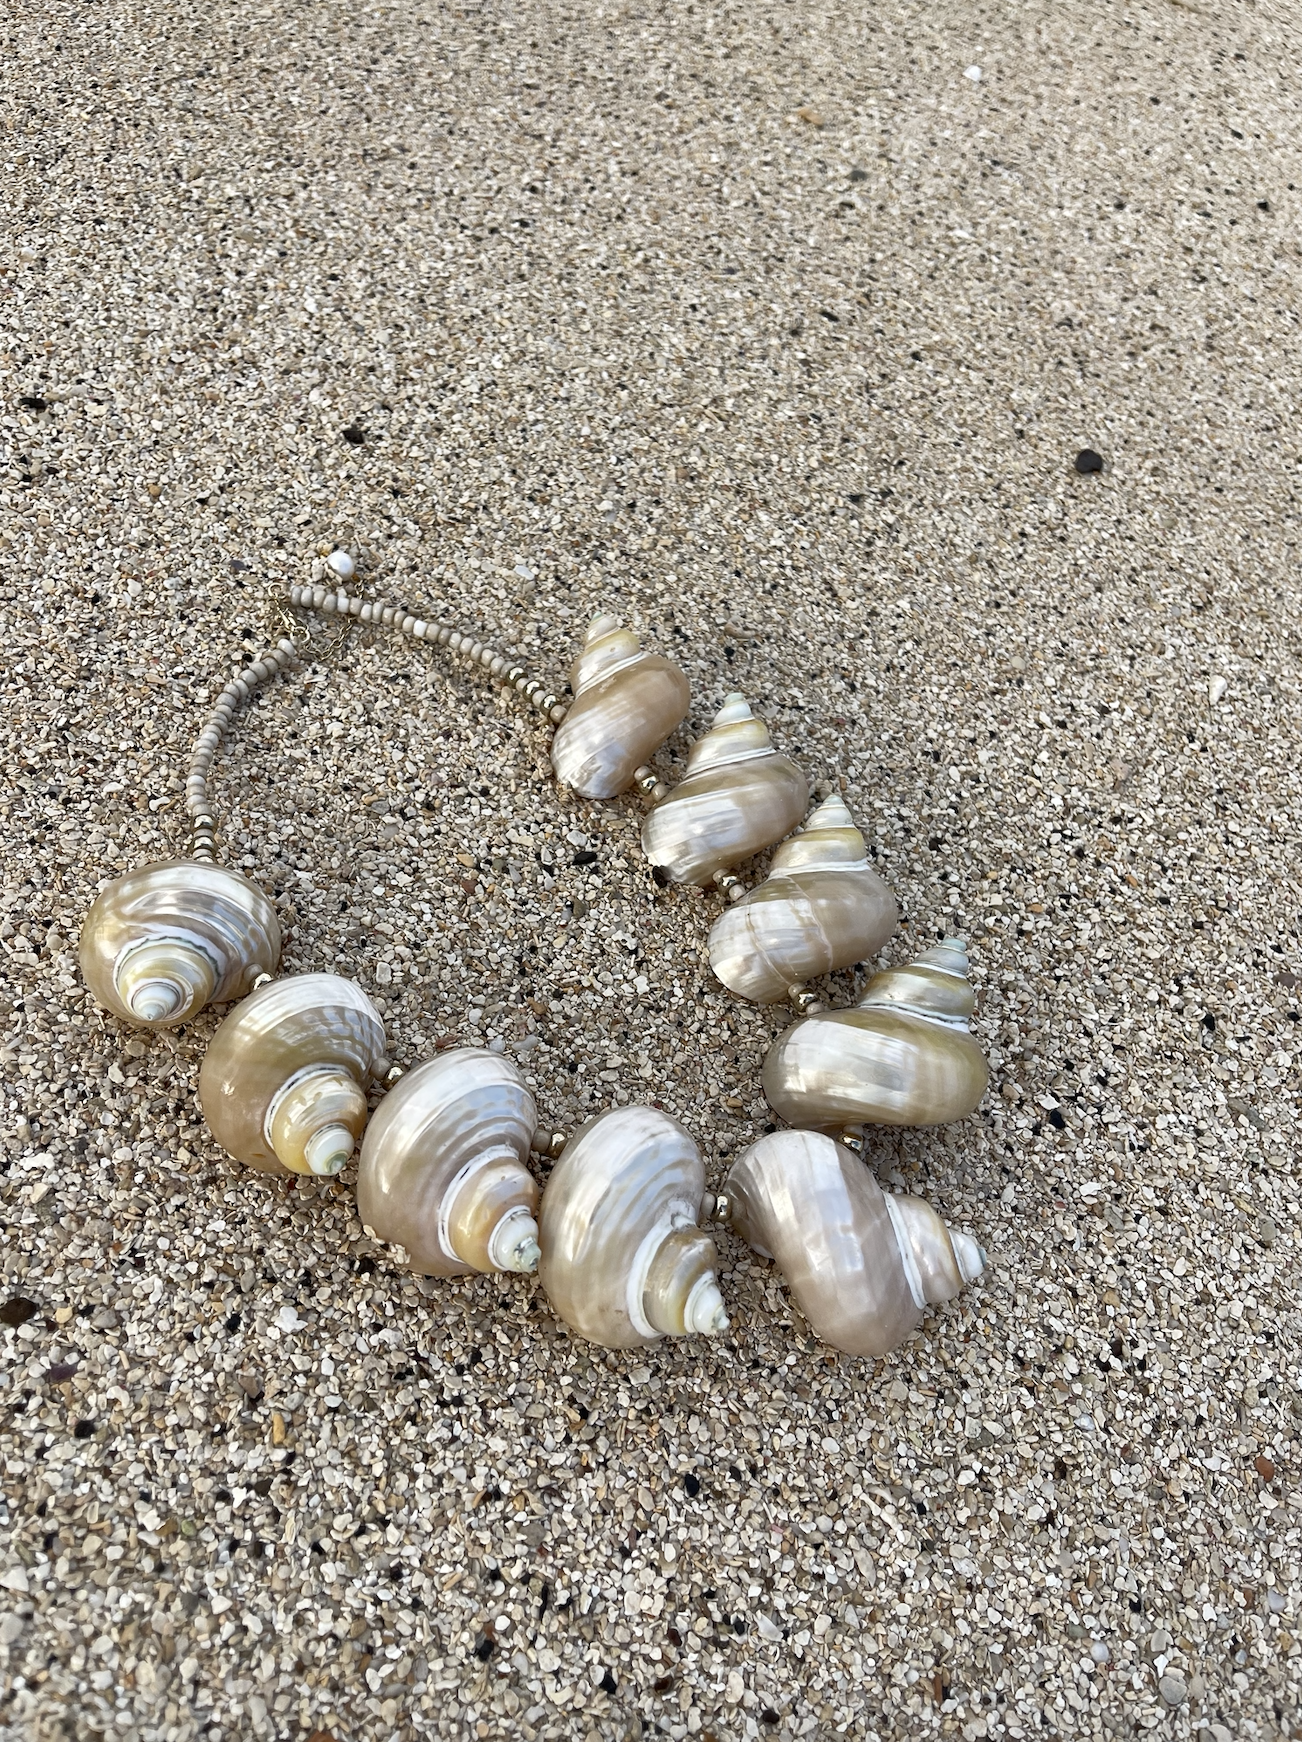 The Ocean Life Statement Necklace